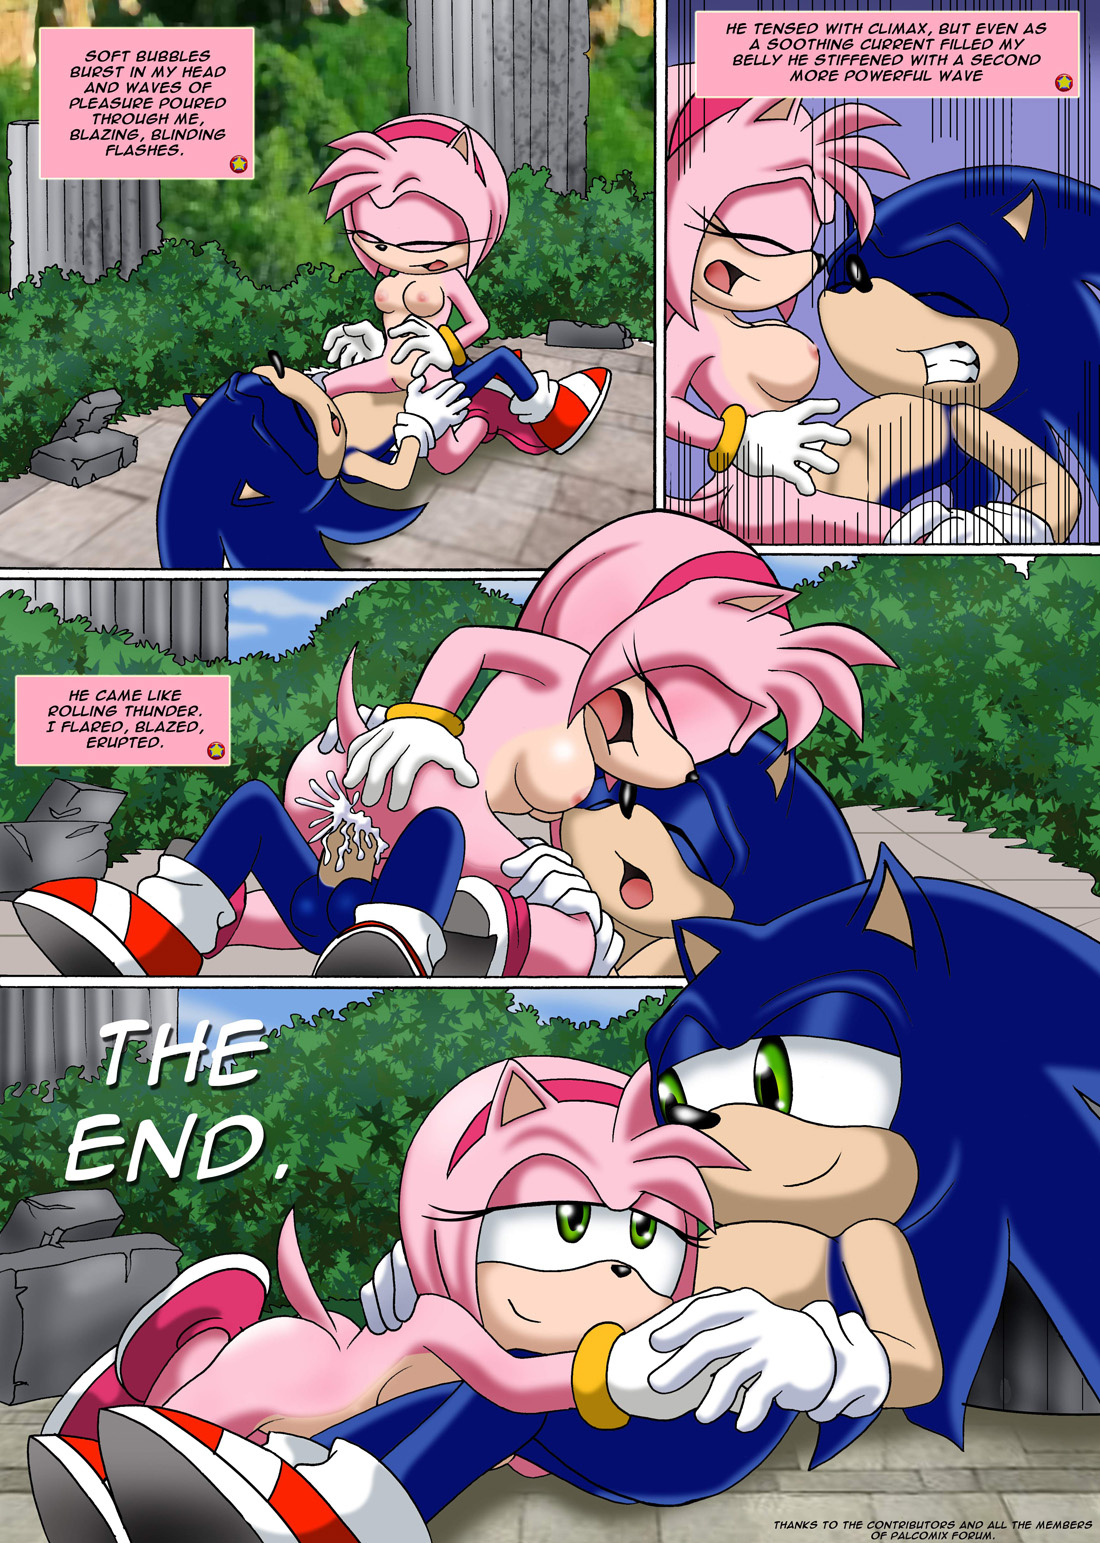 Sonic XXX Project 2 cartoon porn Oral sex, Anal Sex, BDSM, Cosplay, Double Penetration, Furry, Group Sex, Lesbians, Lolicon, Masturbation, Monster Girls, Tentacles